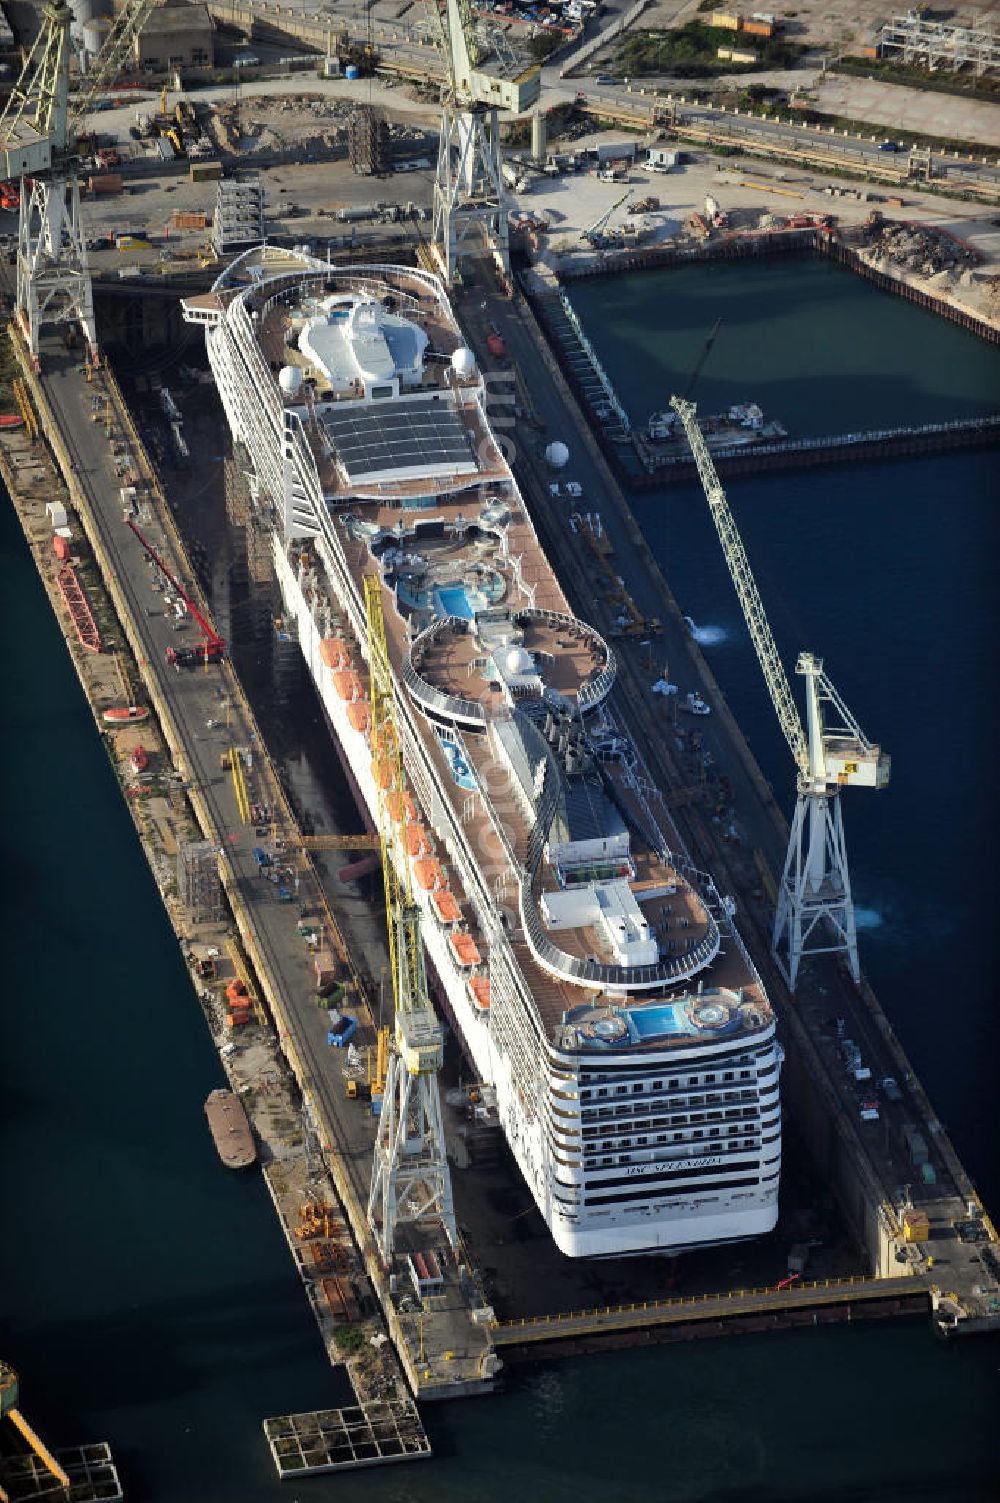 Palermo Sizilien from above - Fincantierii yard with the cruise ship MSC Splendida, of the Italian shipping company MSC Crociers S.A. for the overhaul at the dry dock of the shipyard in Palermo, Sicily, Italy